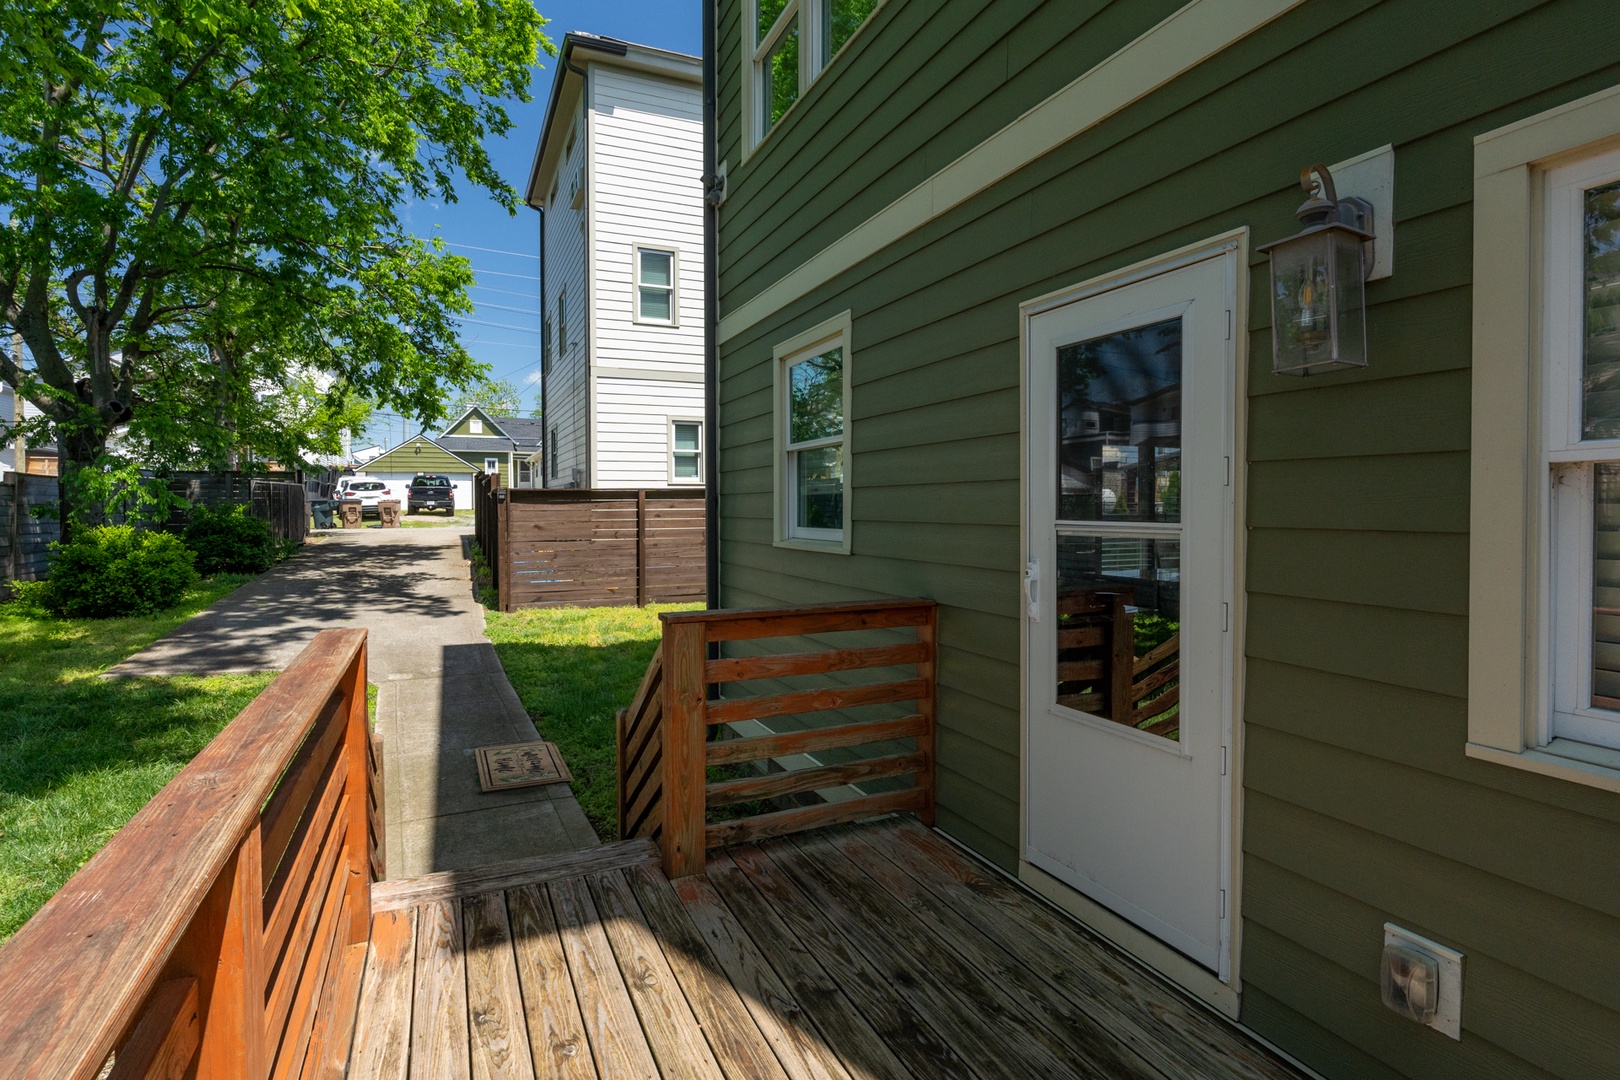 Head inside via the spacious back deck after parking in the Driveway